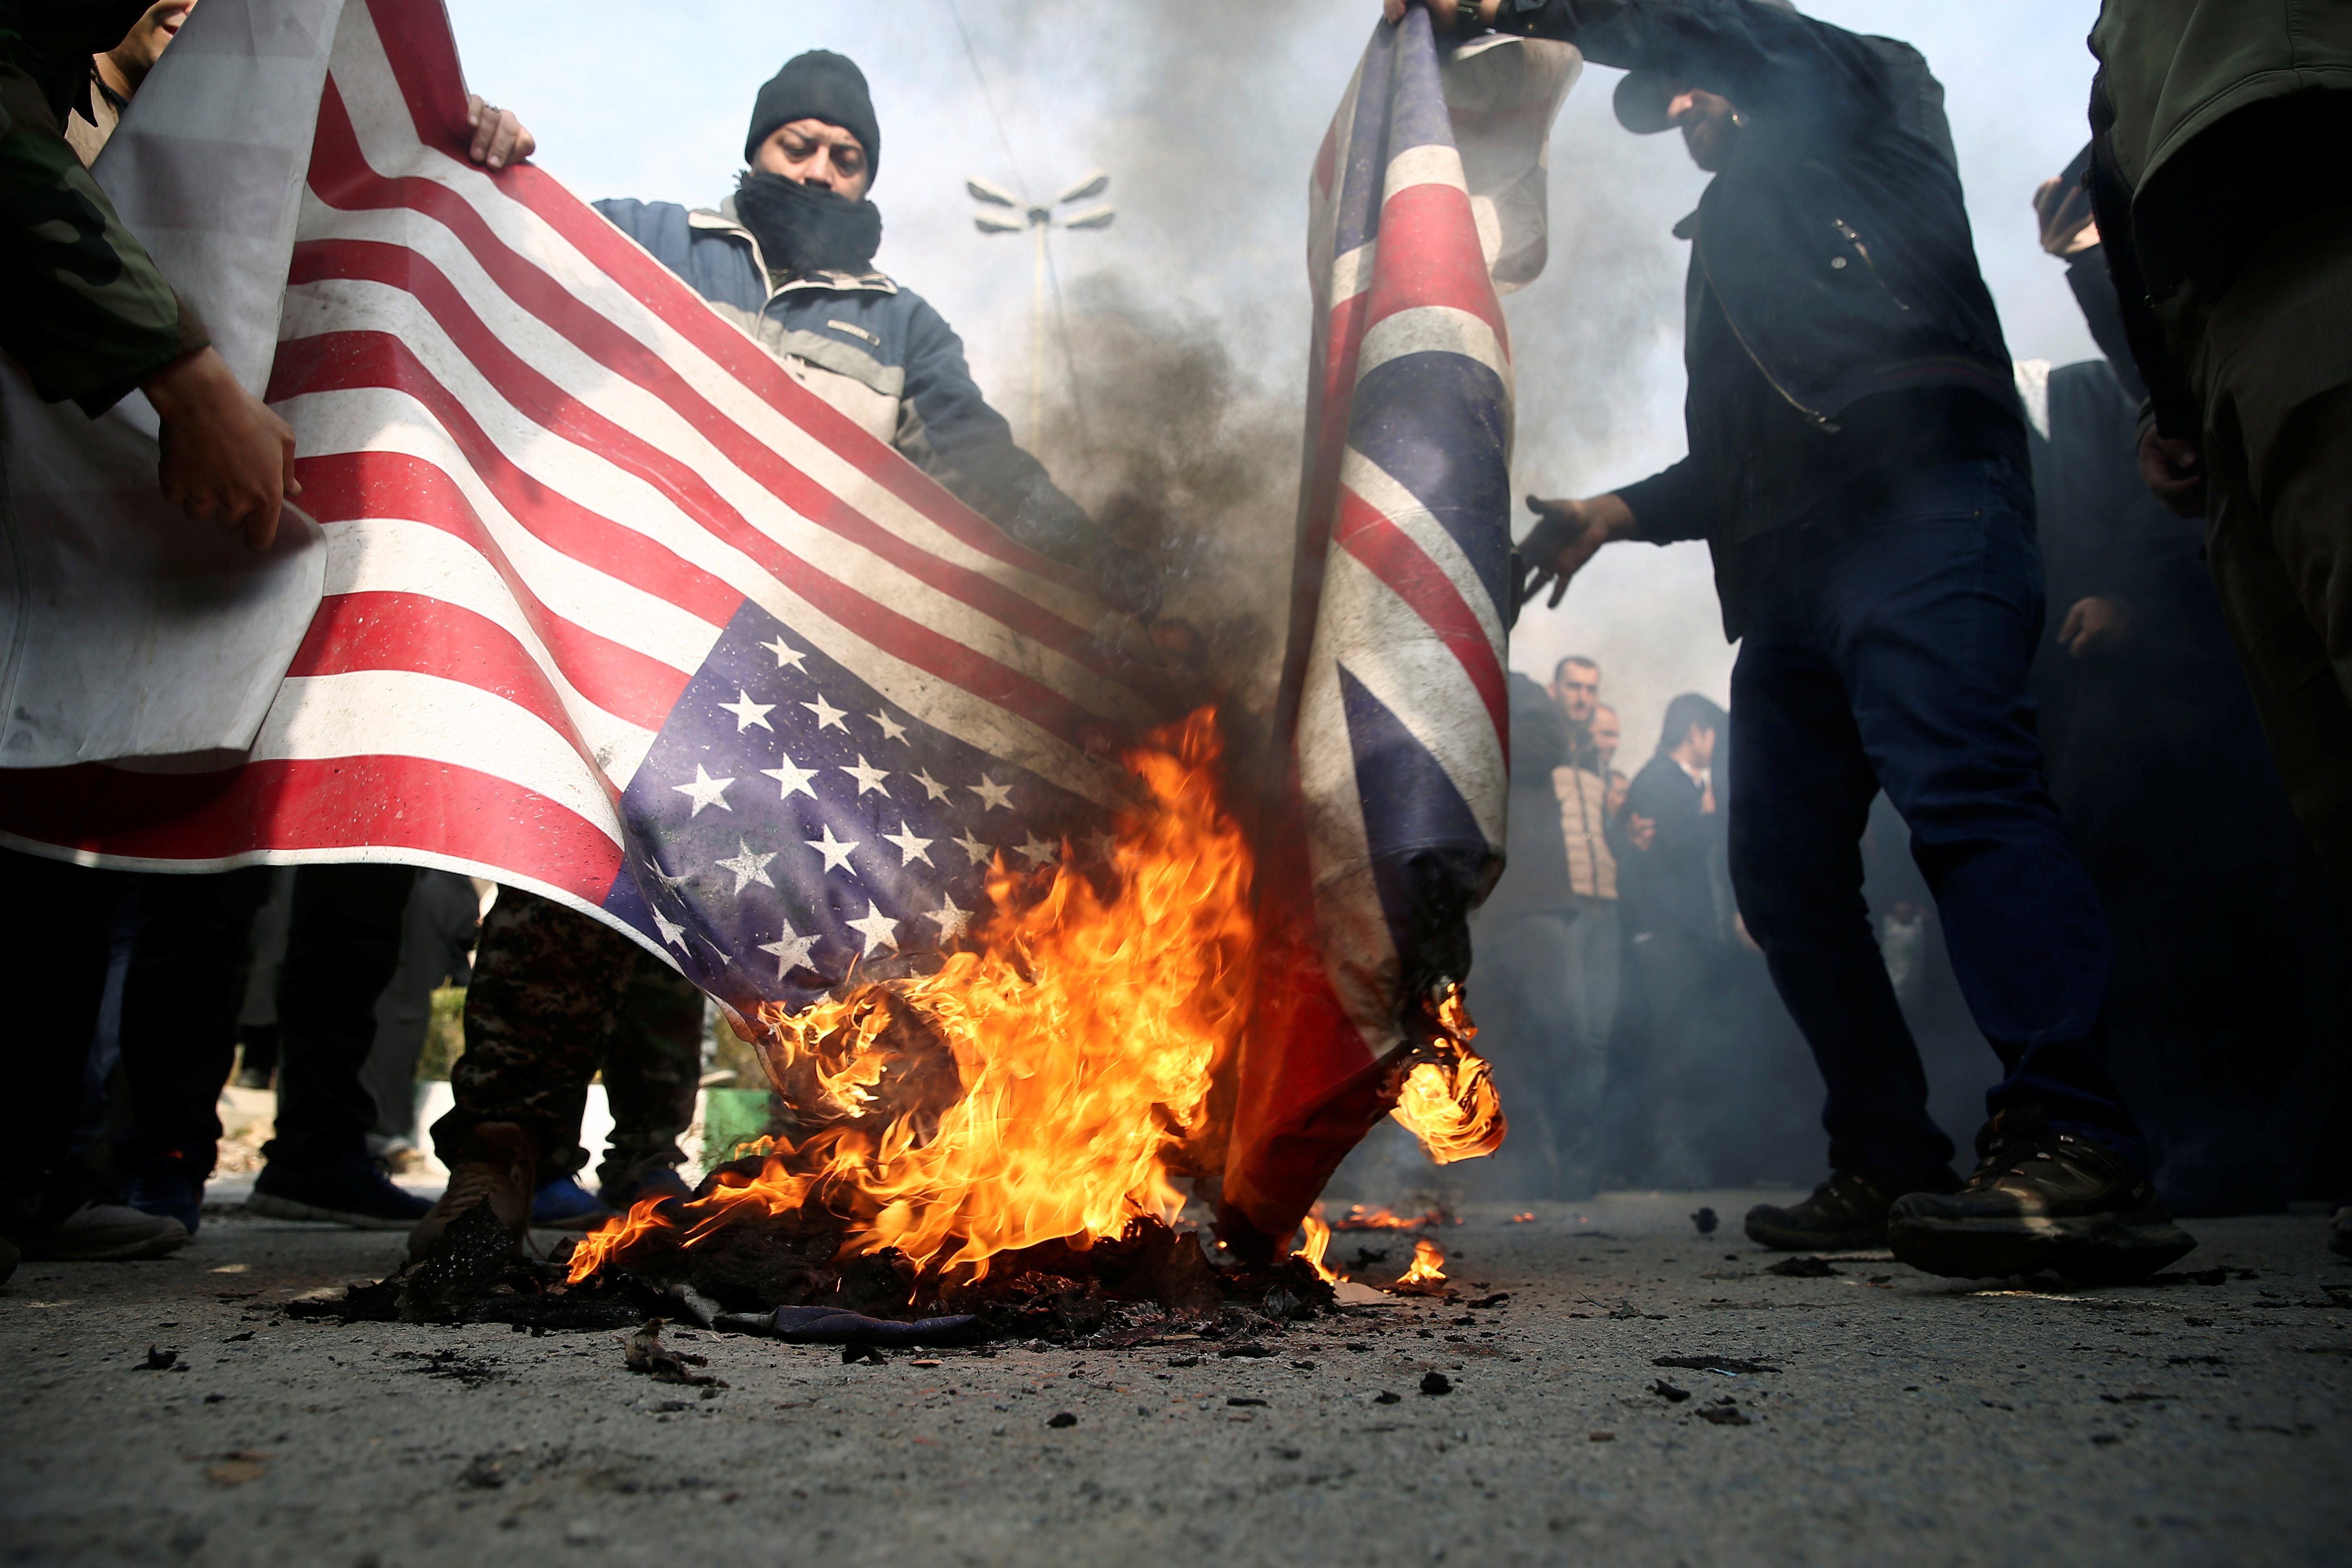 Demonstrators burn the U.S. and British flags during a protest against the assassination of the Iranian Major-General Qassem Soleimani, head of the elite Quds Force, and Iraqi militia commander Abu Mahdi al-Muhandis who were killed in an air strike in Baghdad airport, in Tehran, Iran January 3, 2020. WANA (West Asia News Agency)/Nazanin Tabatabaee via REUTERS